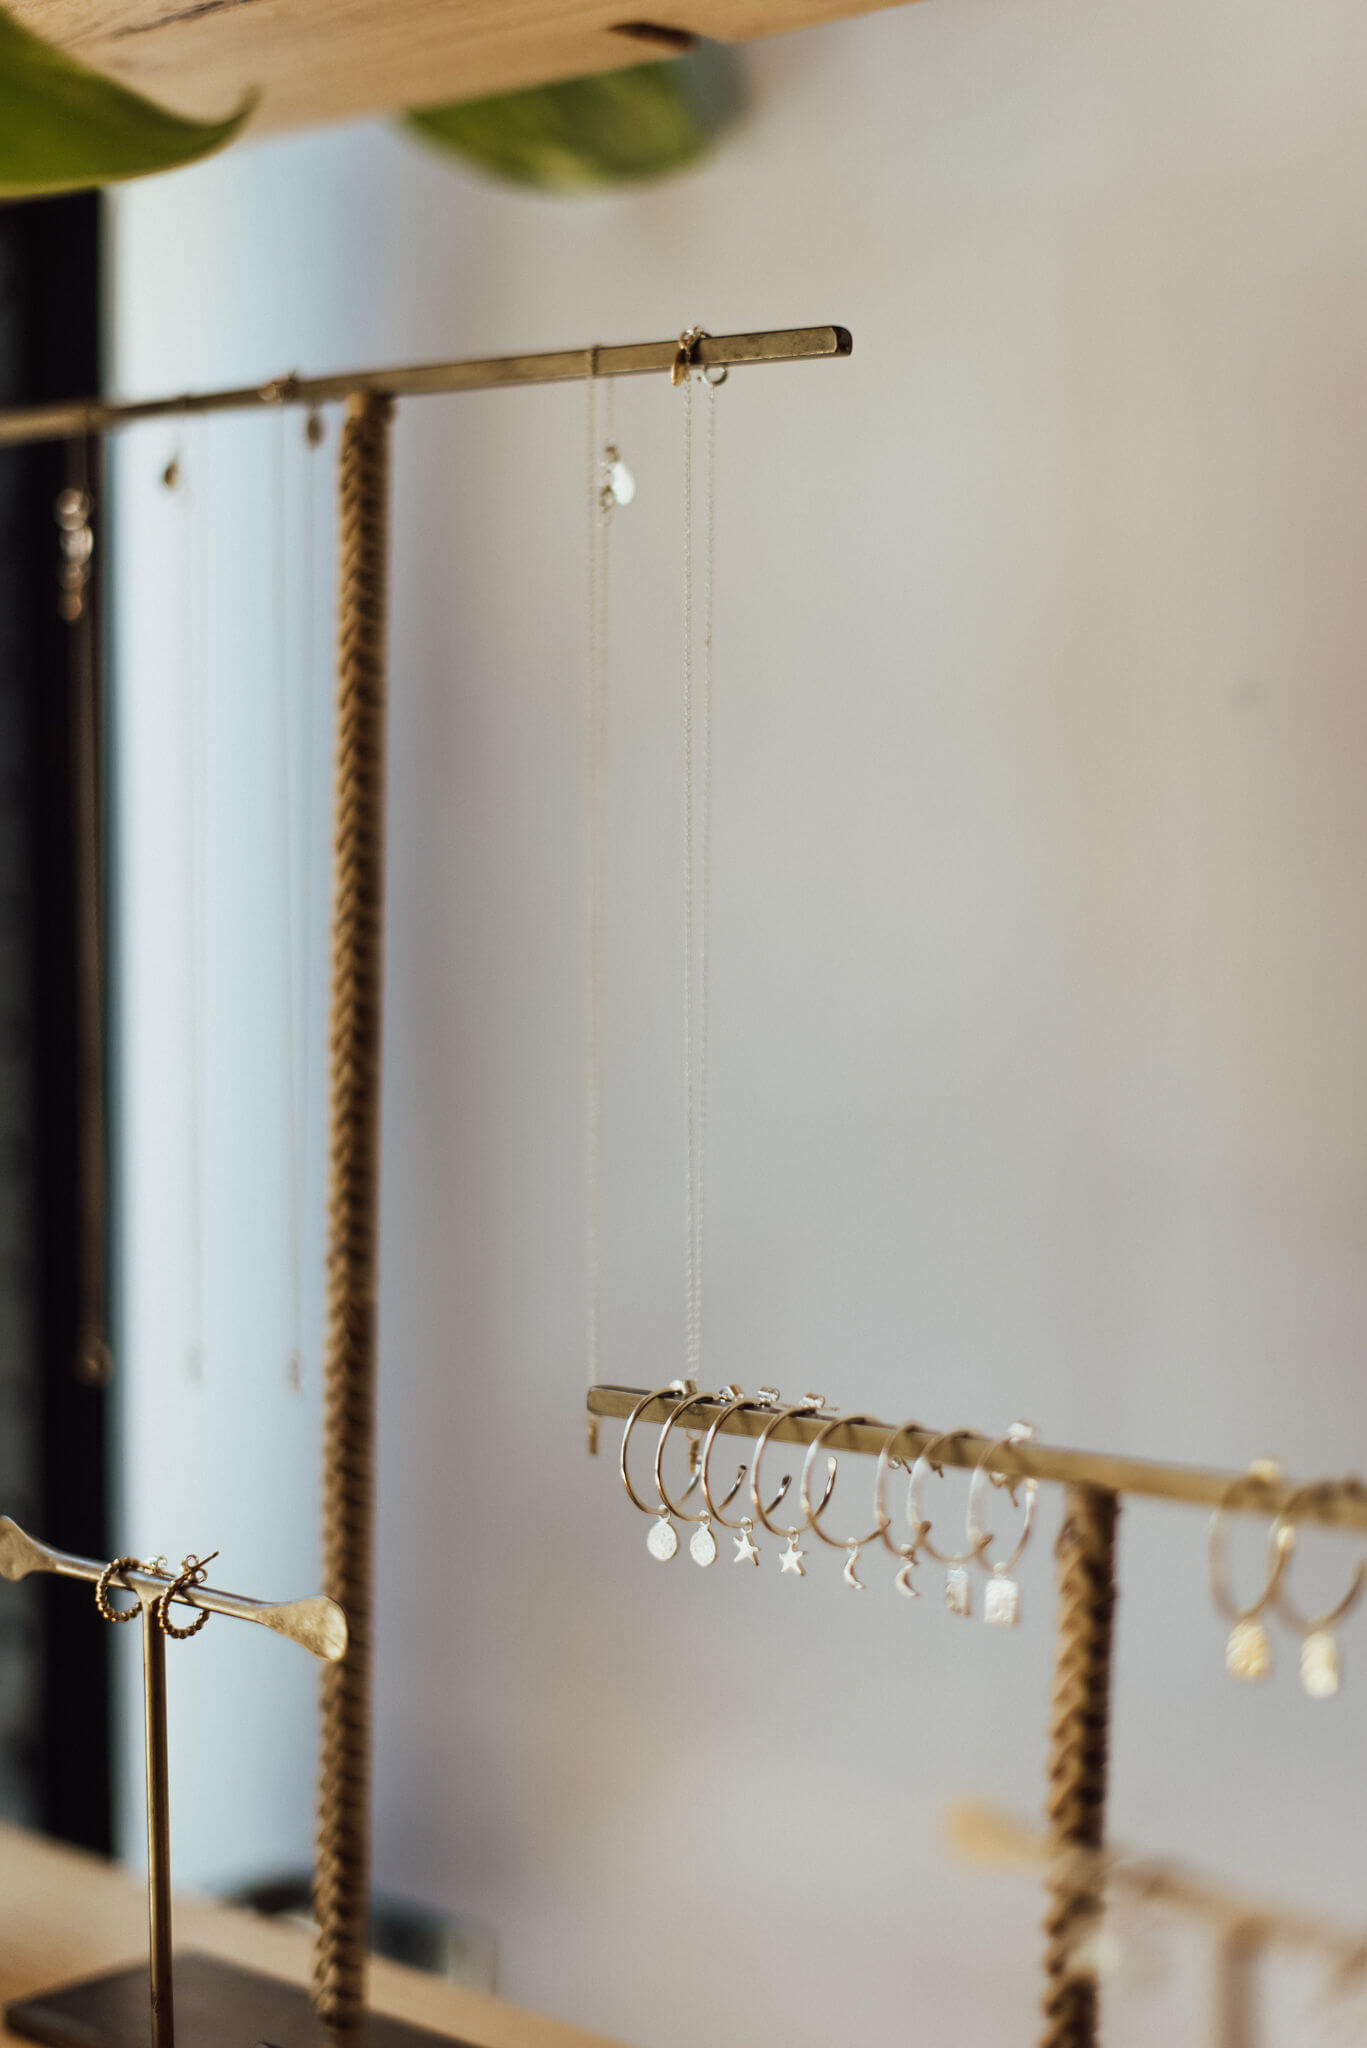 Independent jewellery company épanoui inside the Bedford store